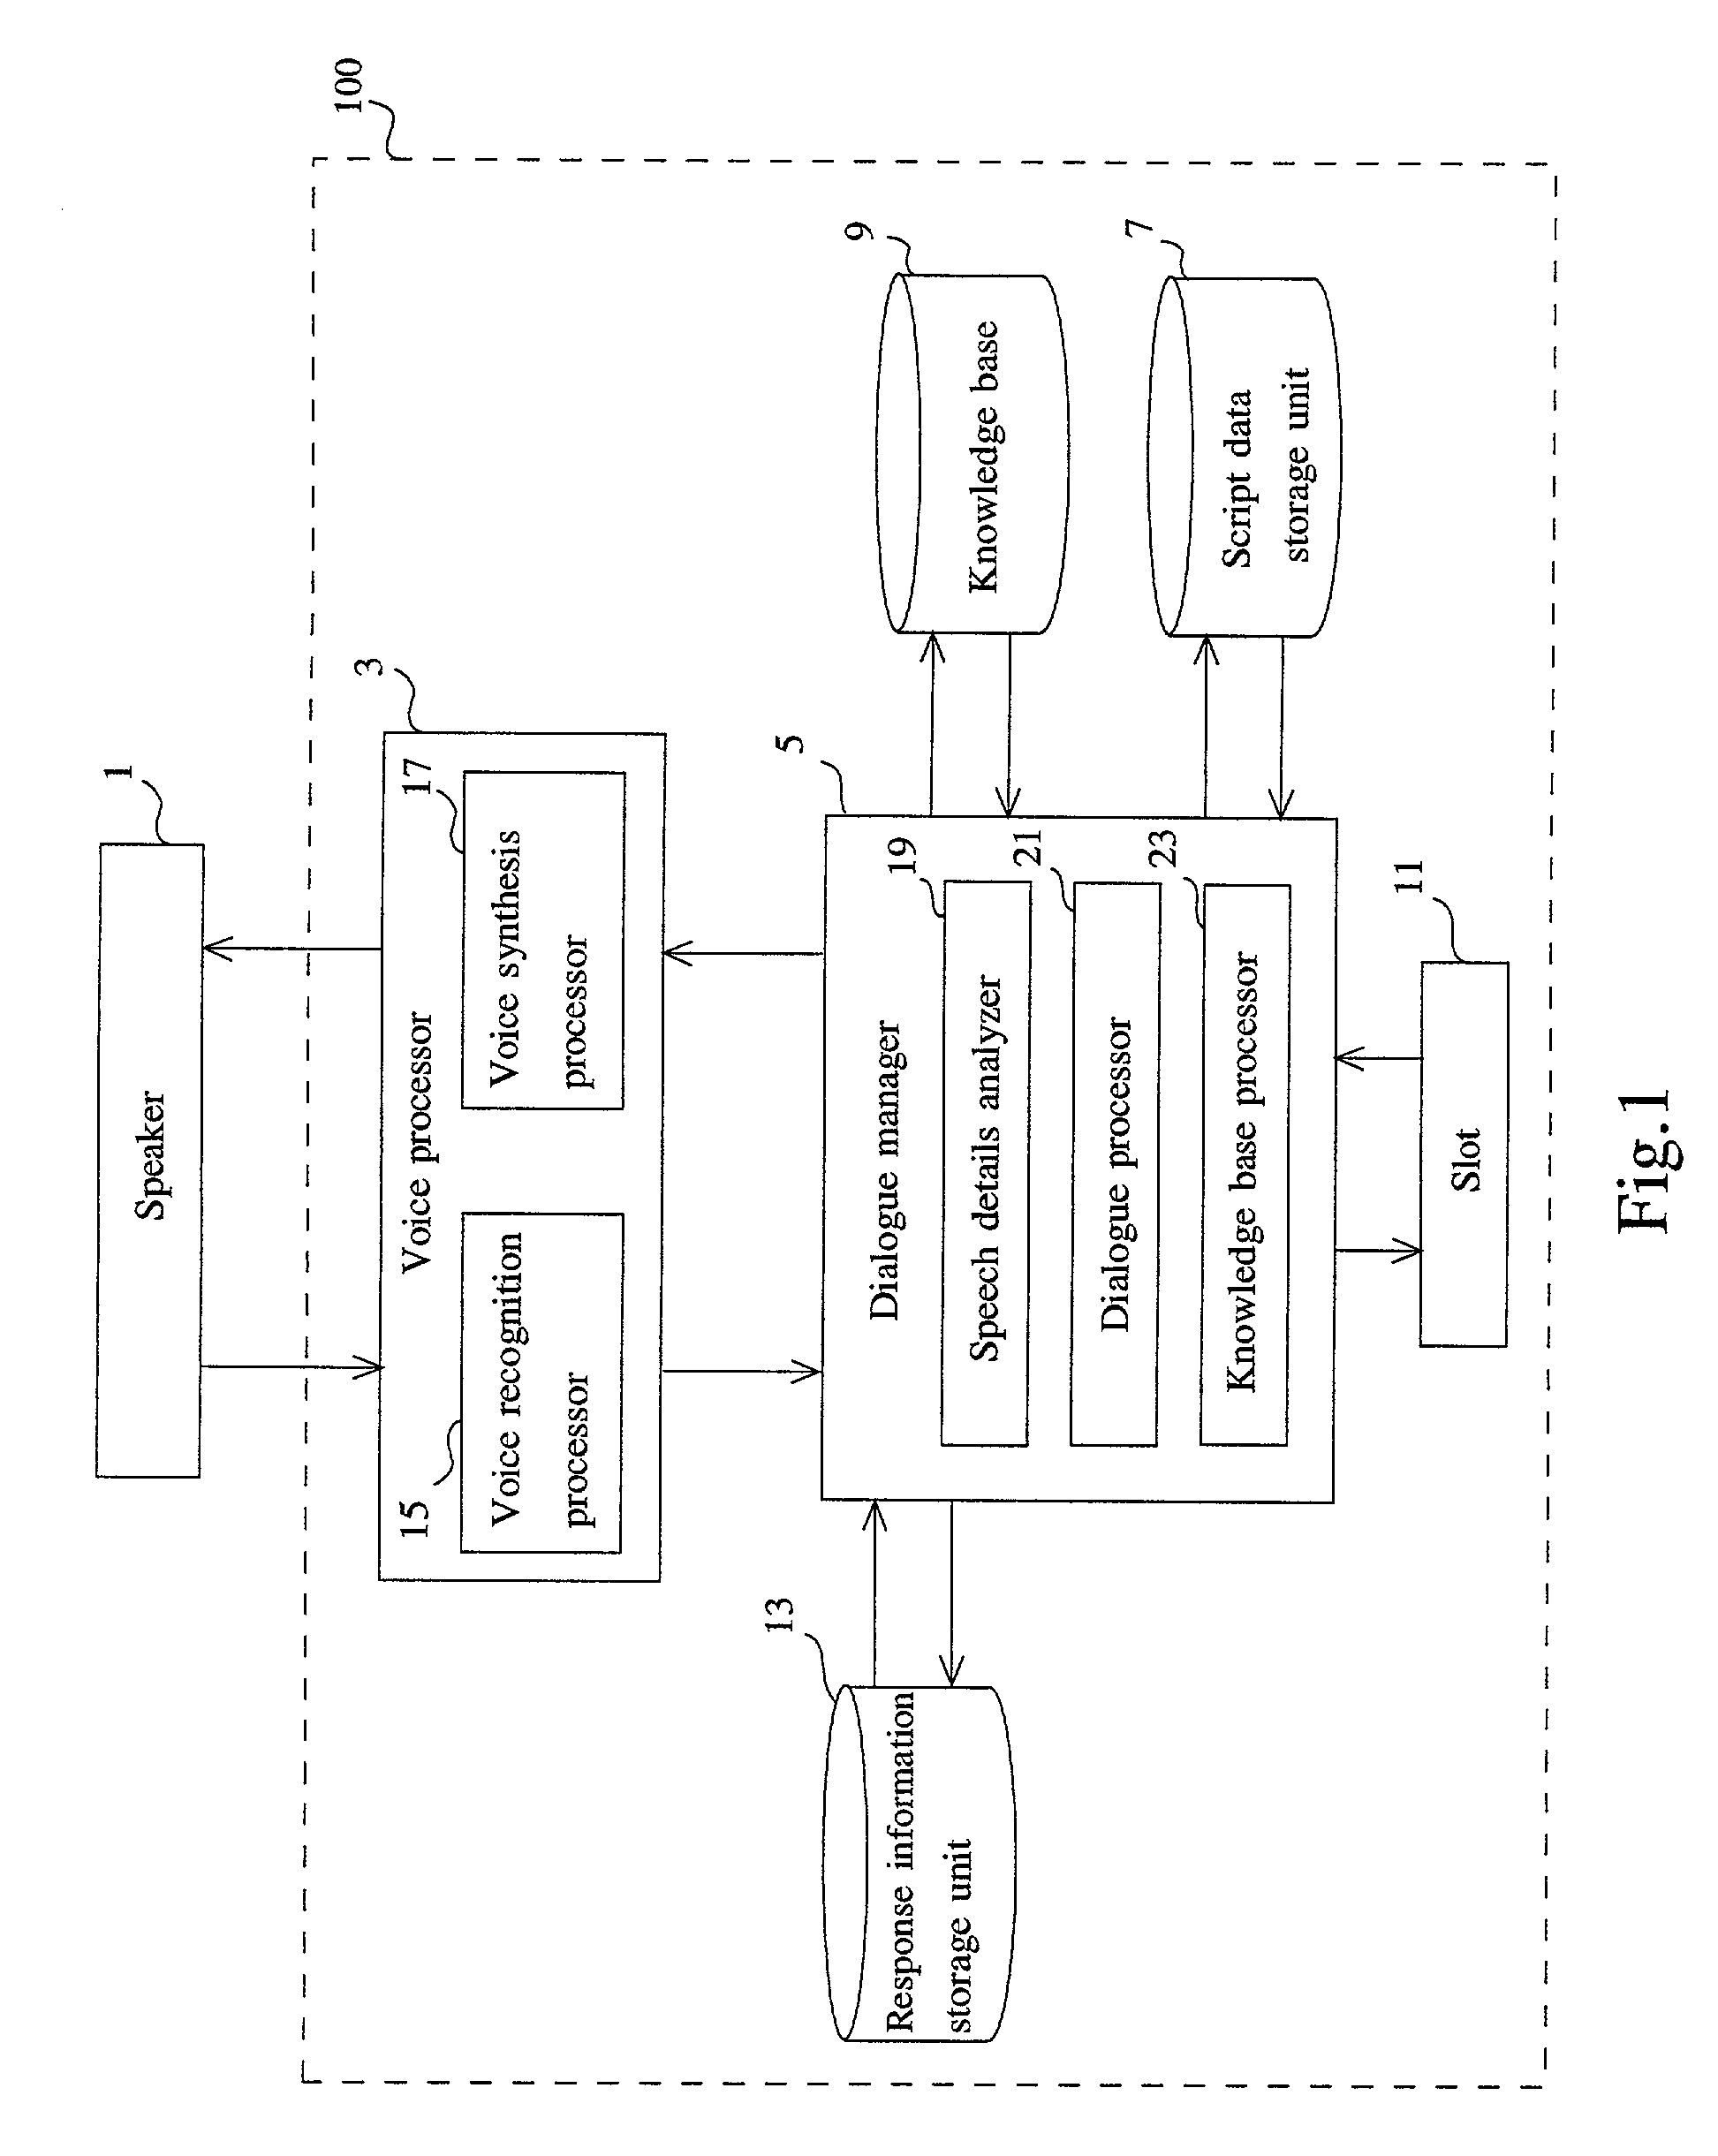 Dialogue processing system and method